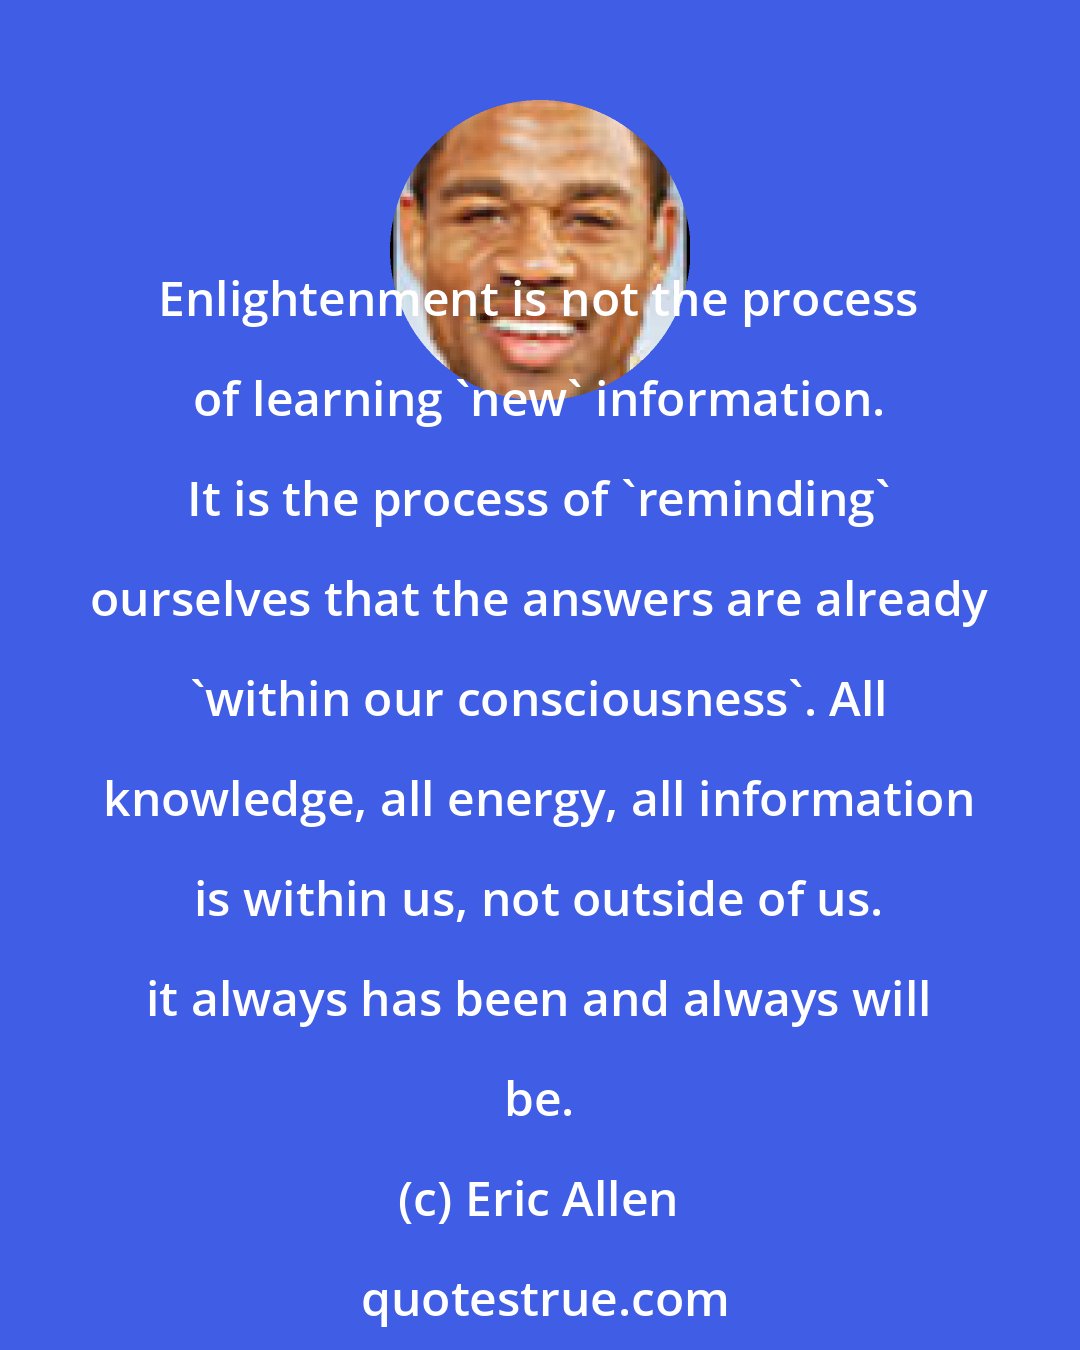 Eric Allen: Enlightenment is not the process of learning 'new' information. It is the process of 'reminding' ourselves that the answers are already 'within our consciousness'. All knowledge, all energy, all information is within us, not outside of us. it always has been and always will be.